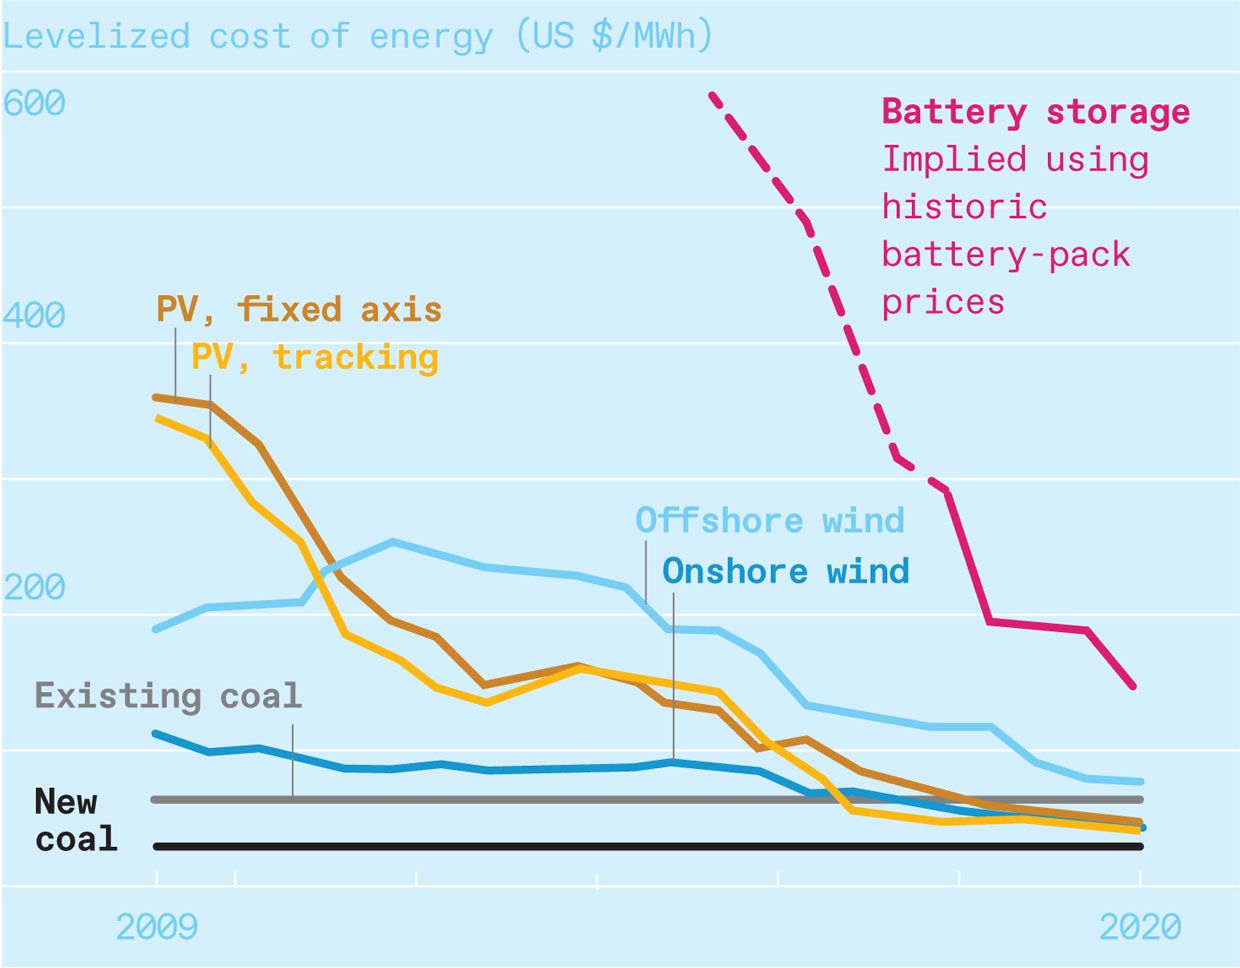 The levelized cost of energy describes the costs of building and operating power plants over their lifetimes